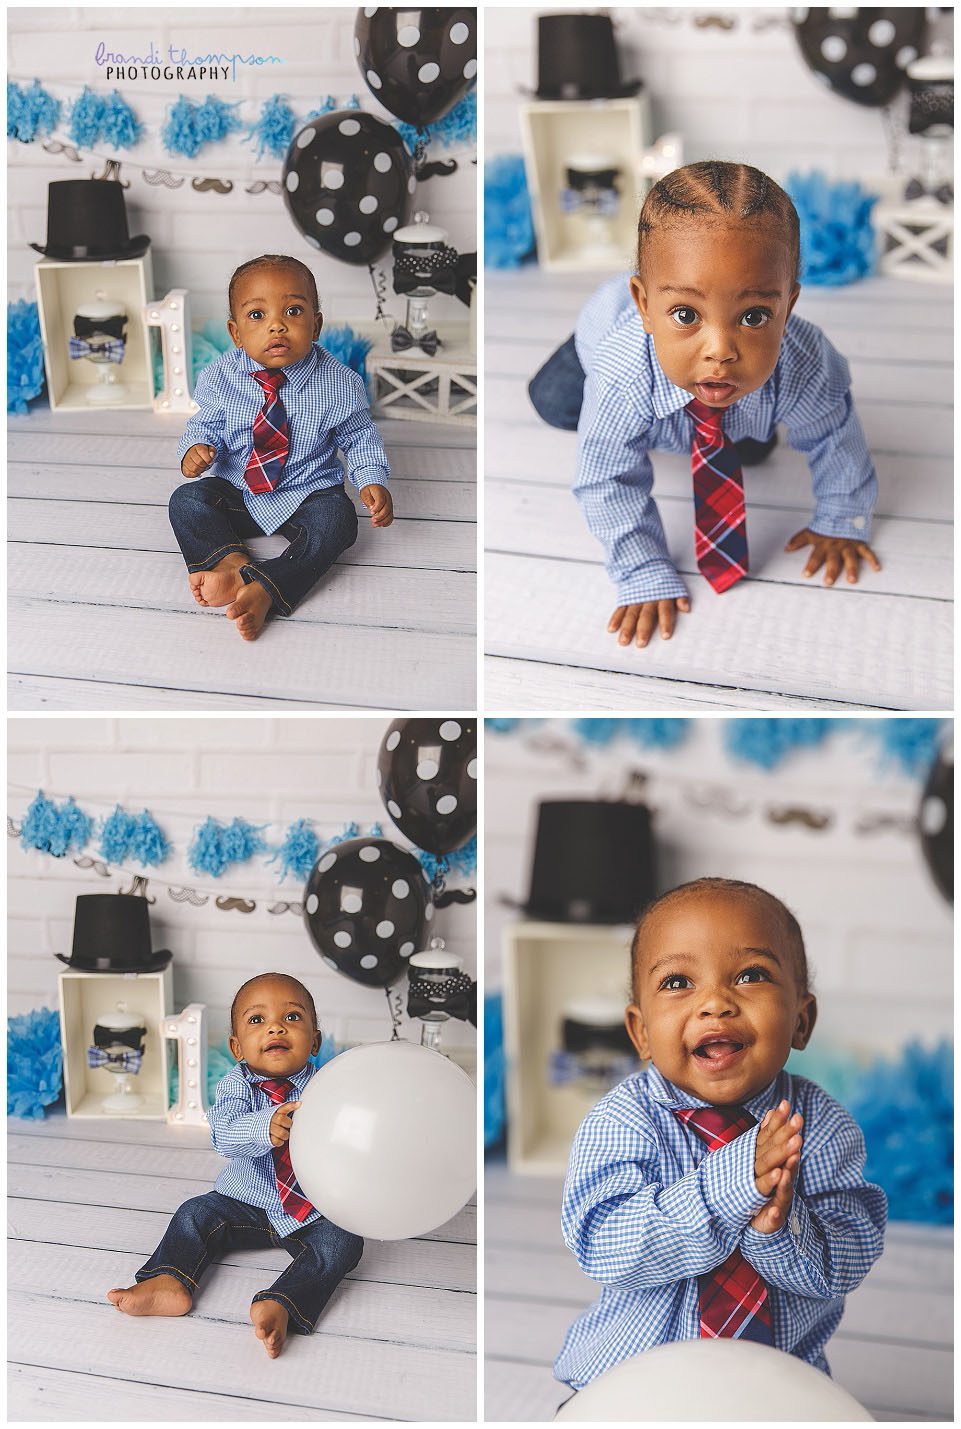 one year old Black boy in blue shirt, red and blue tie and jeans in a white, black and blue gentleman themed set